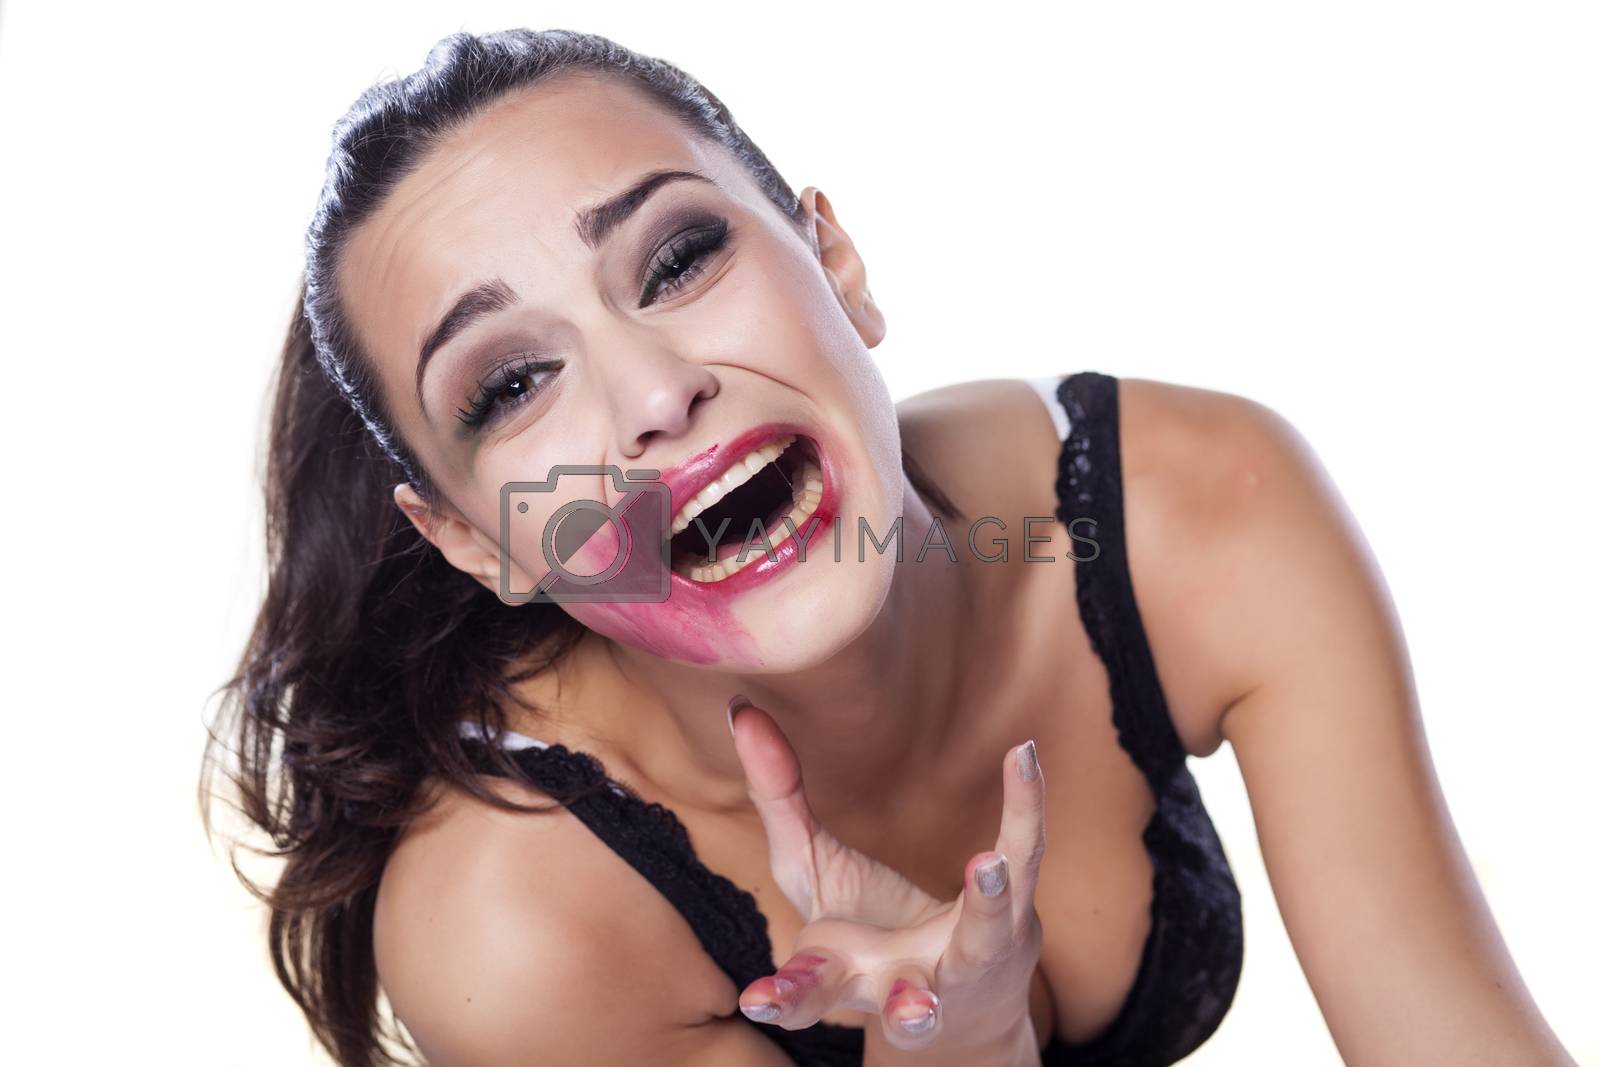 Royalty free image of beautiful desperate girl with smeared makeup by Vladimirfloyd